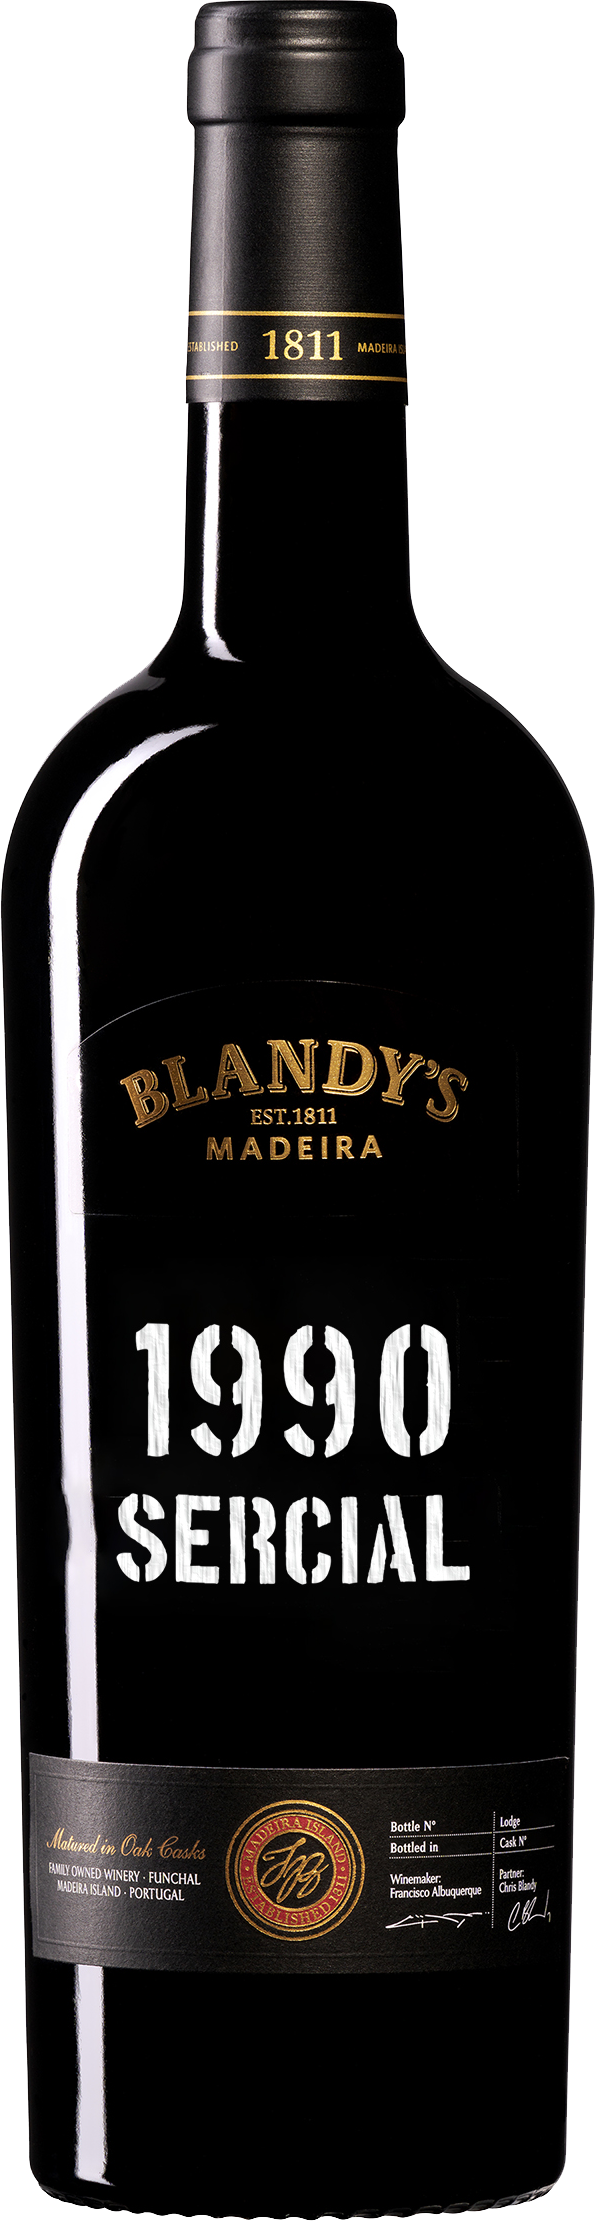 Product Image for BLANDY'S VINTAGE SERCIAL1990 